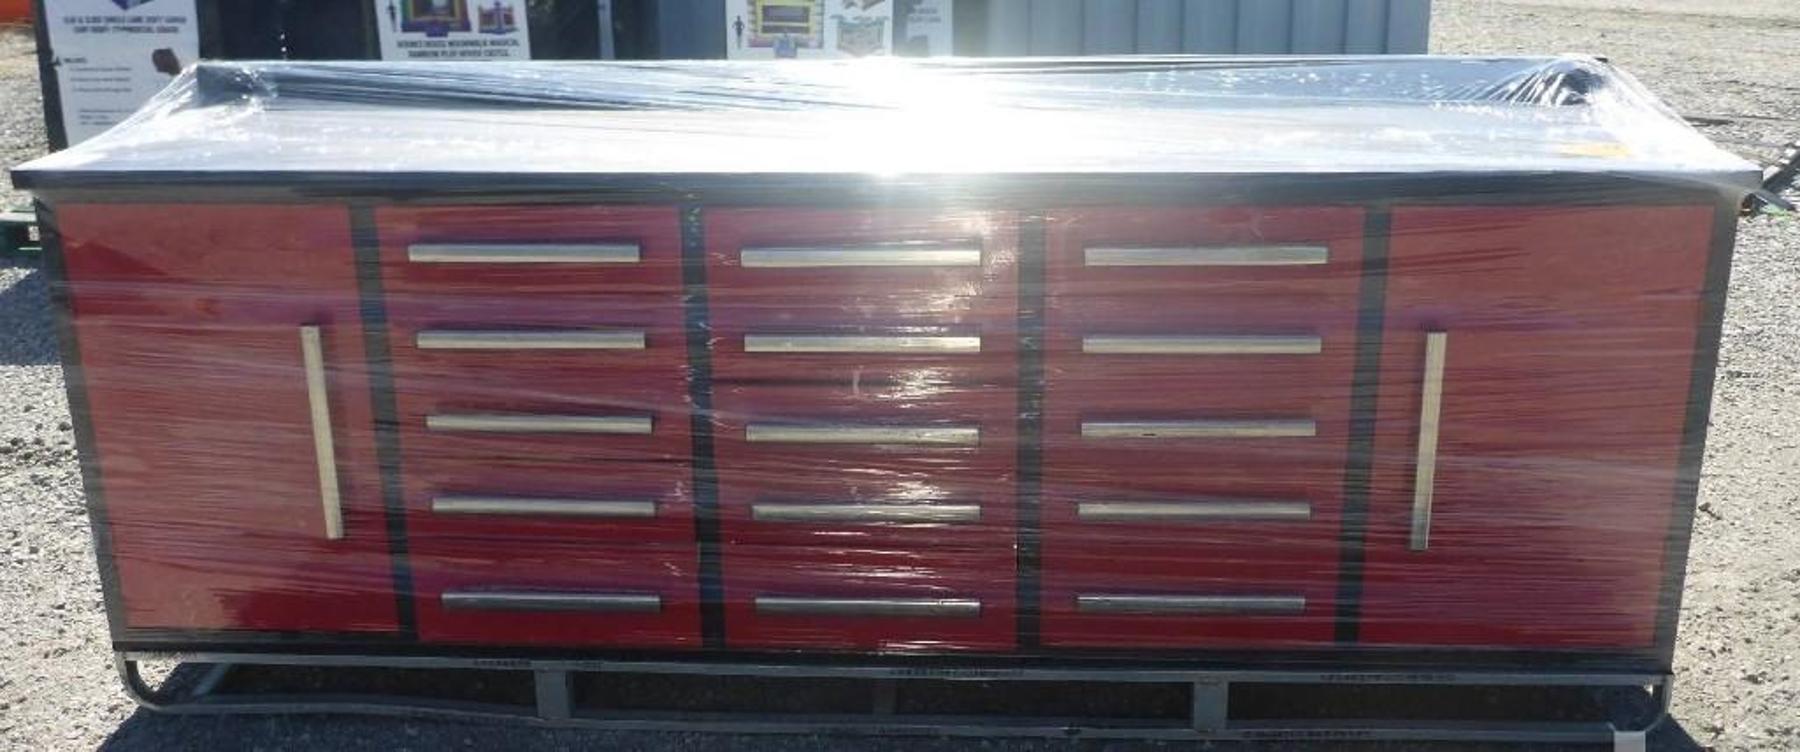 New Storage Buildings & Tool Boxes, New 40' Sea Container, Attachments, & Warehouse Equipment